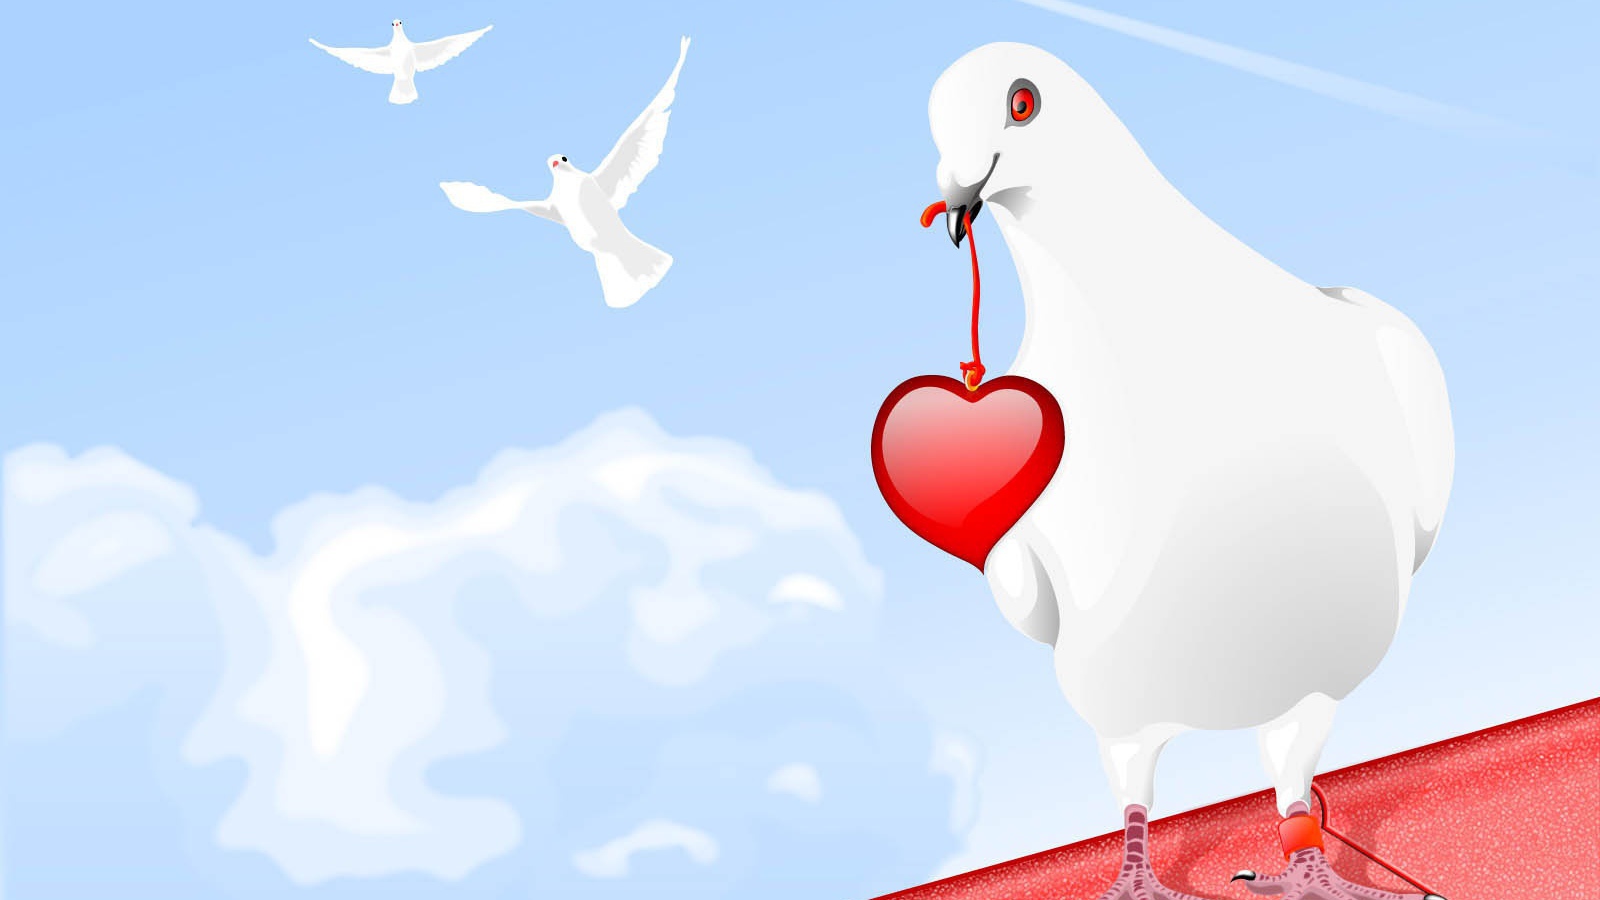 Dove with hearts on Valentine's Day February 14